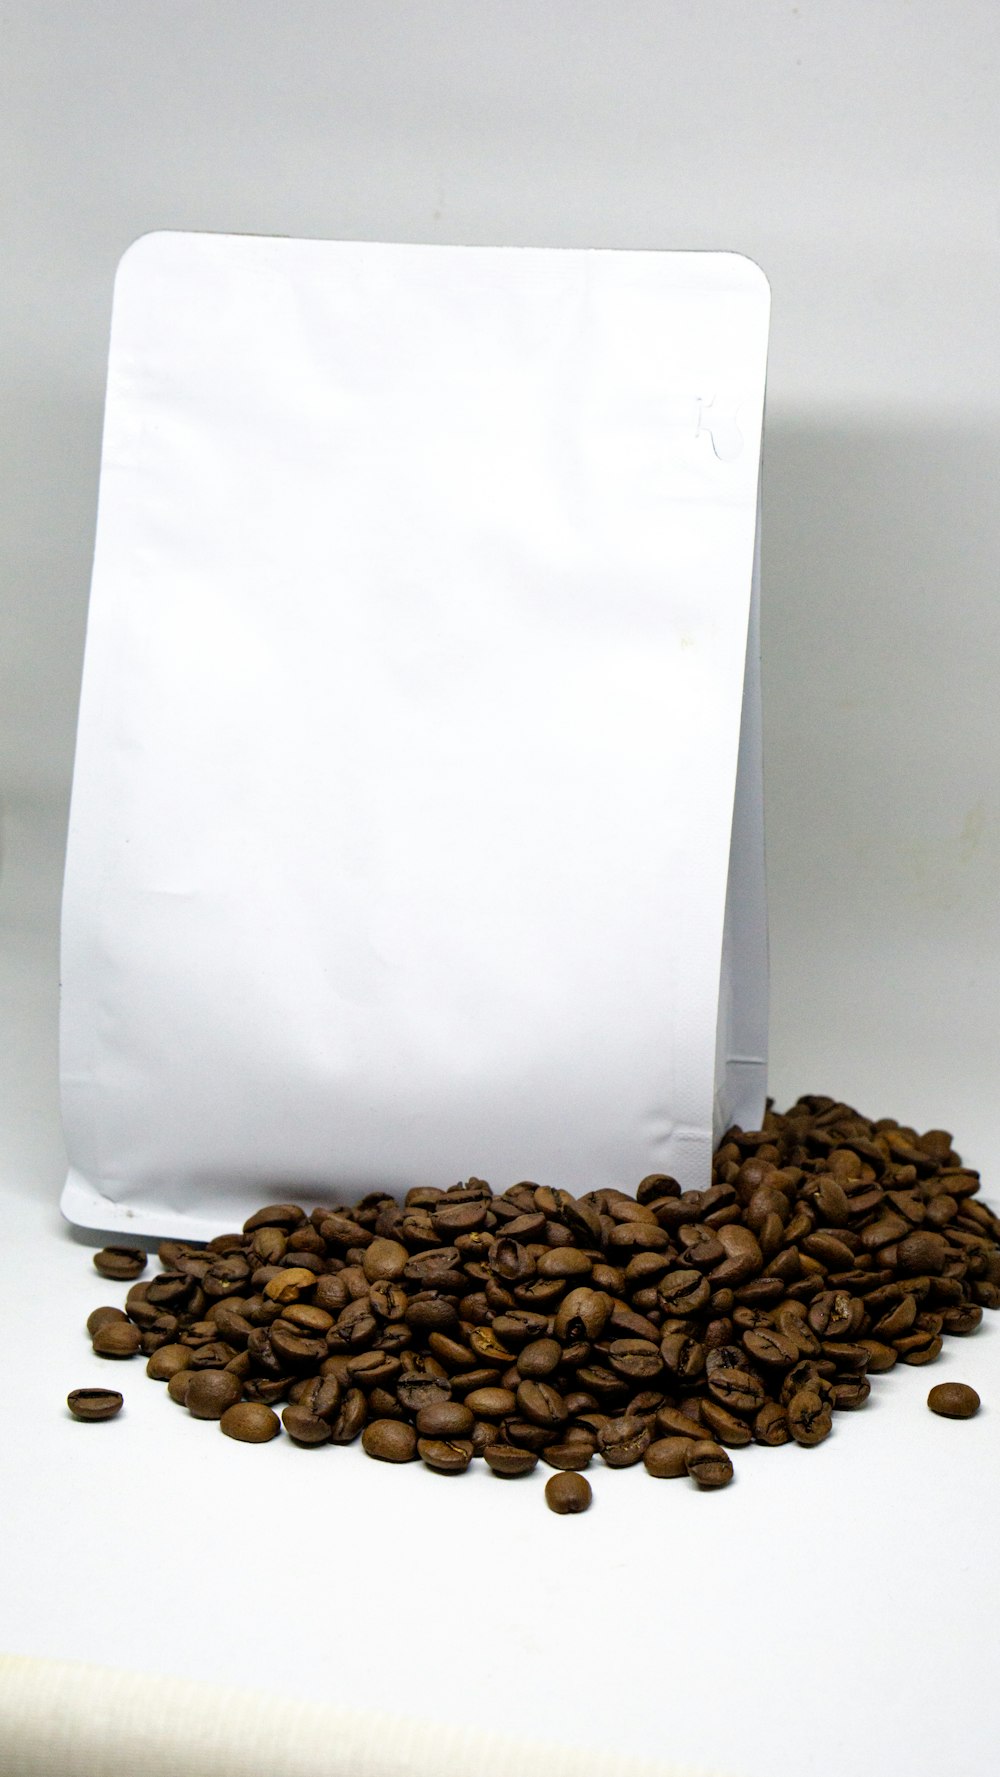 a bag of coffee beans next to a pile of coffee beans